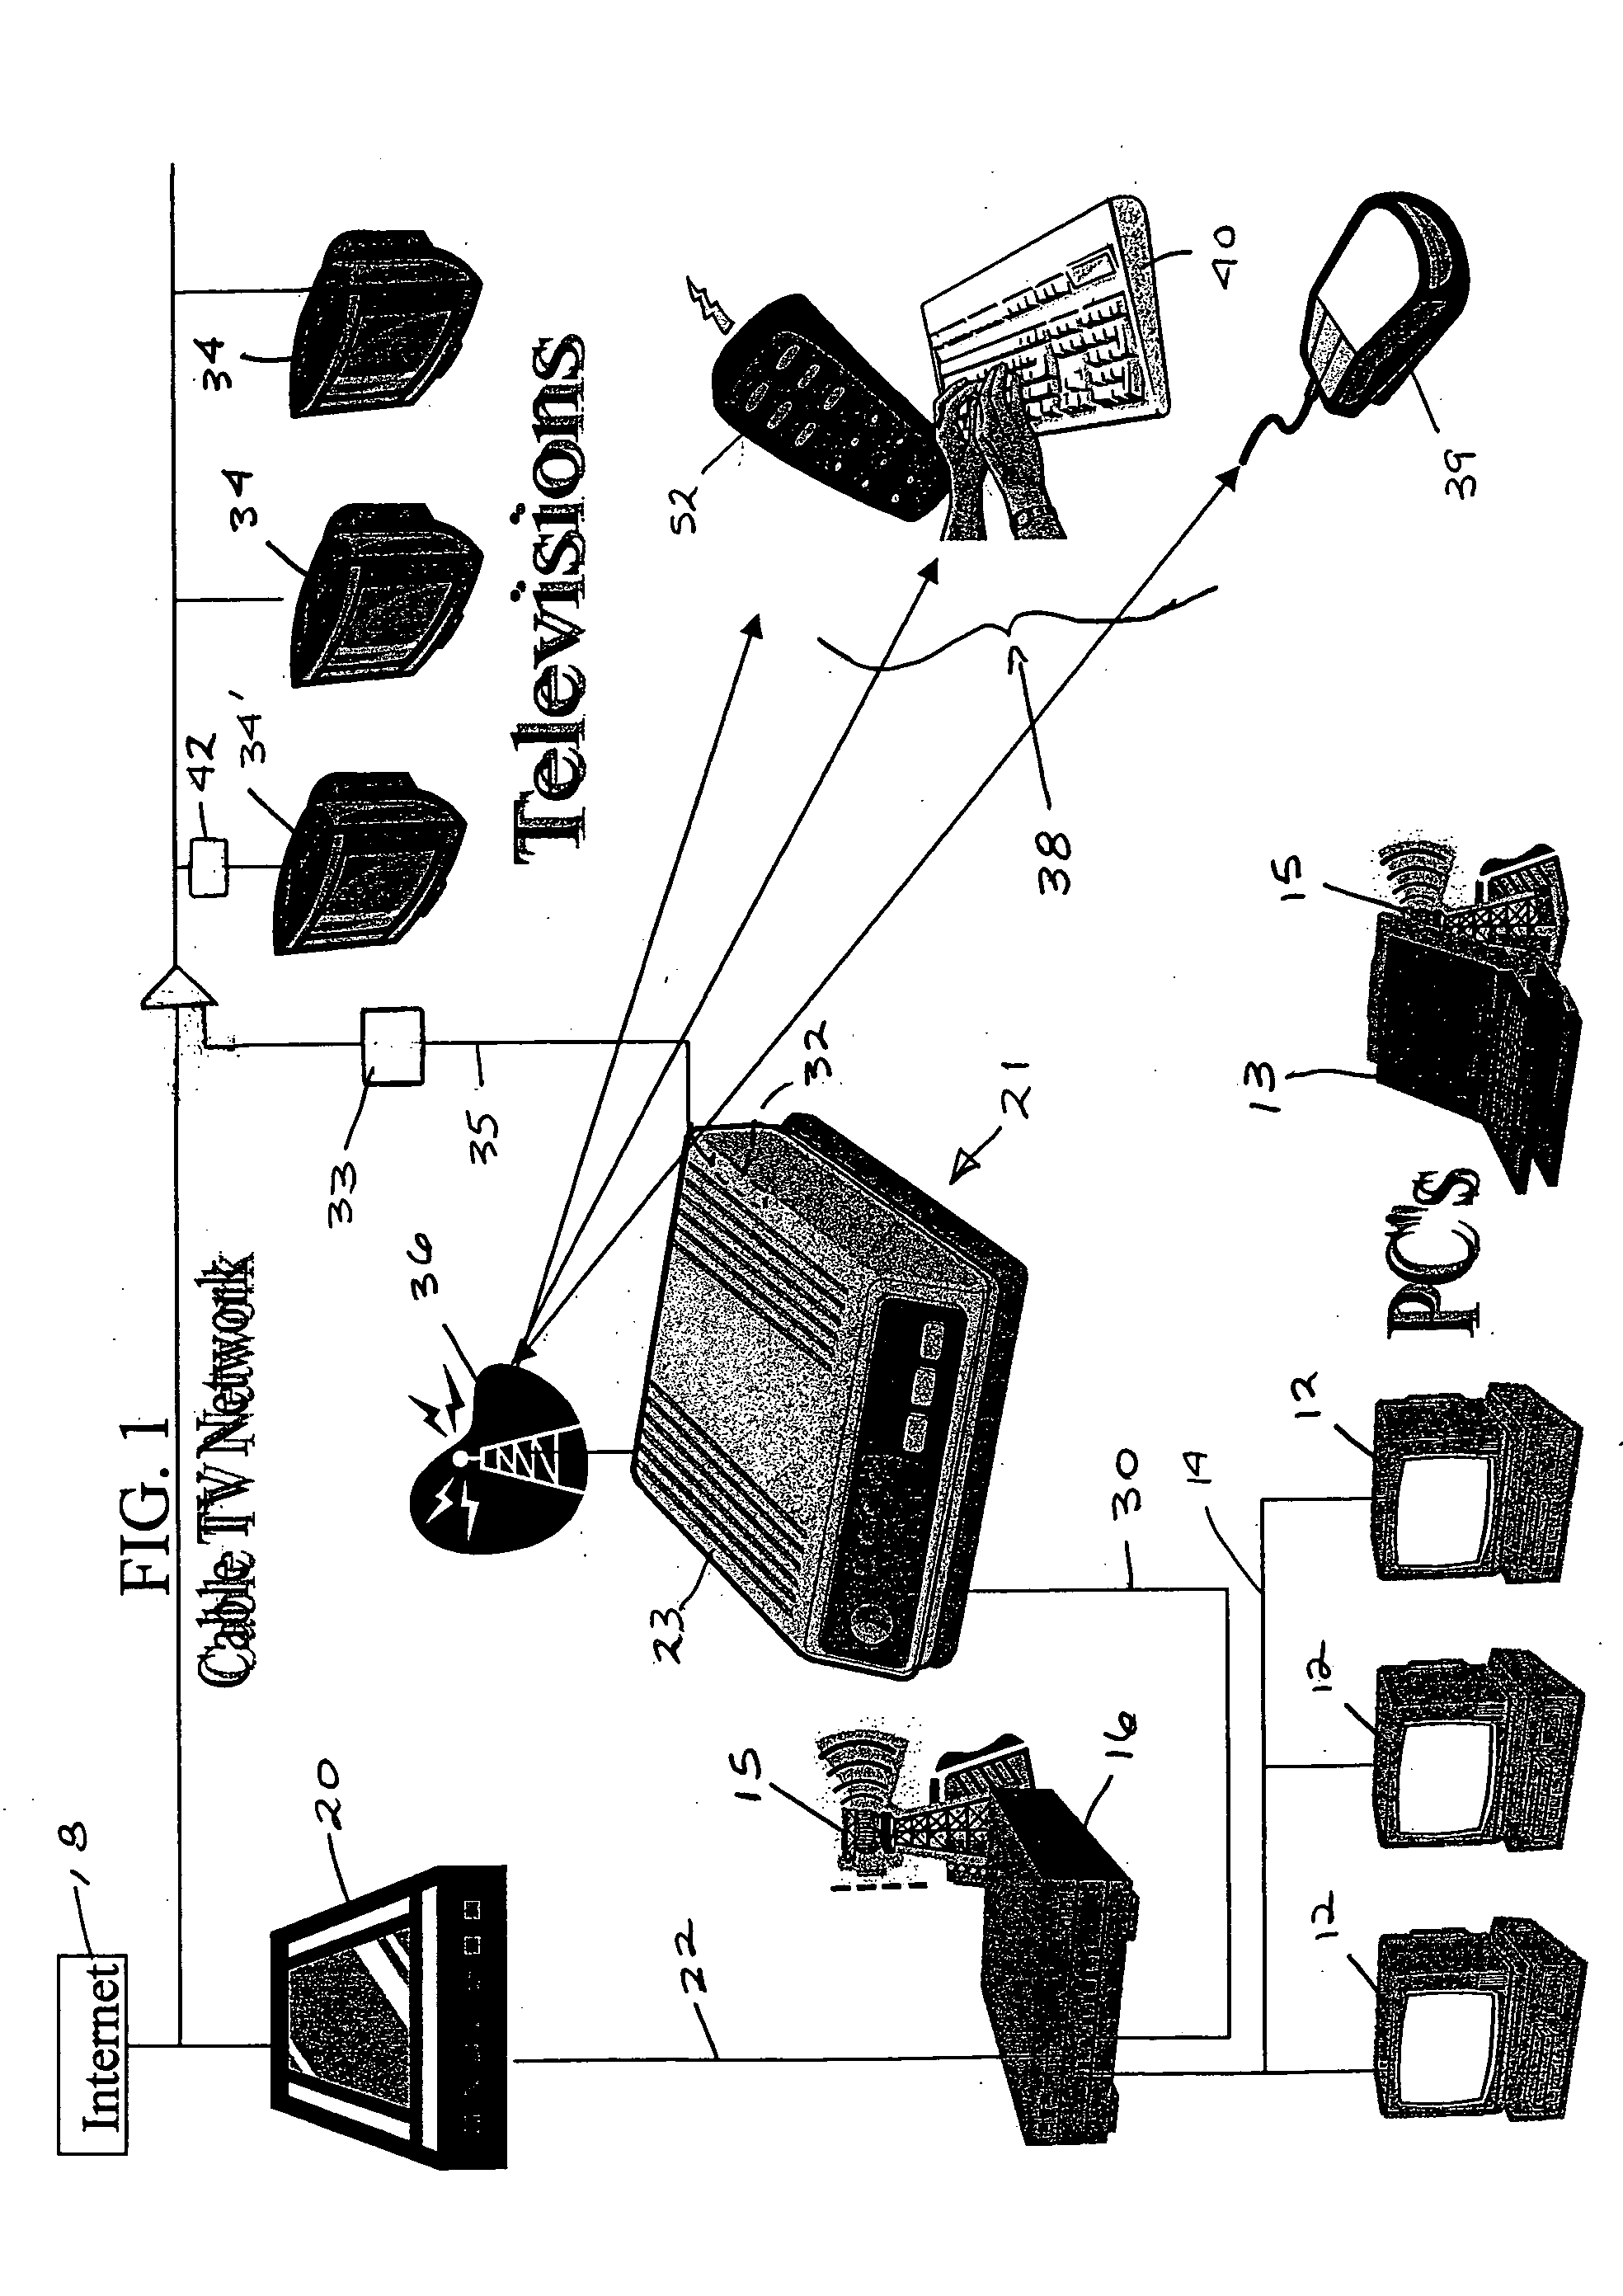 Method and apparatus for controlling child's internet use